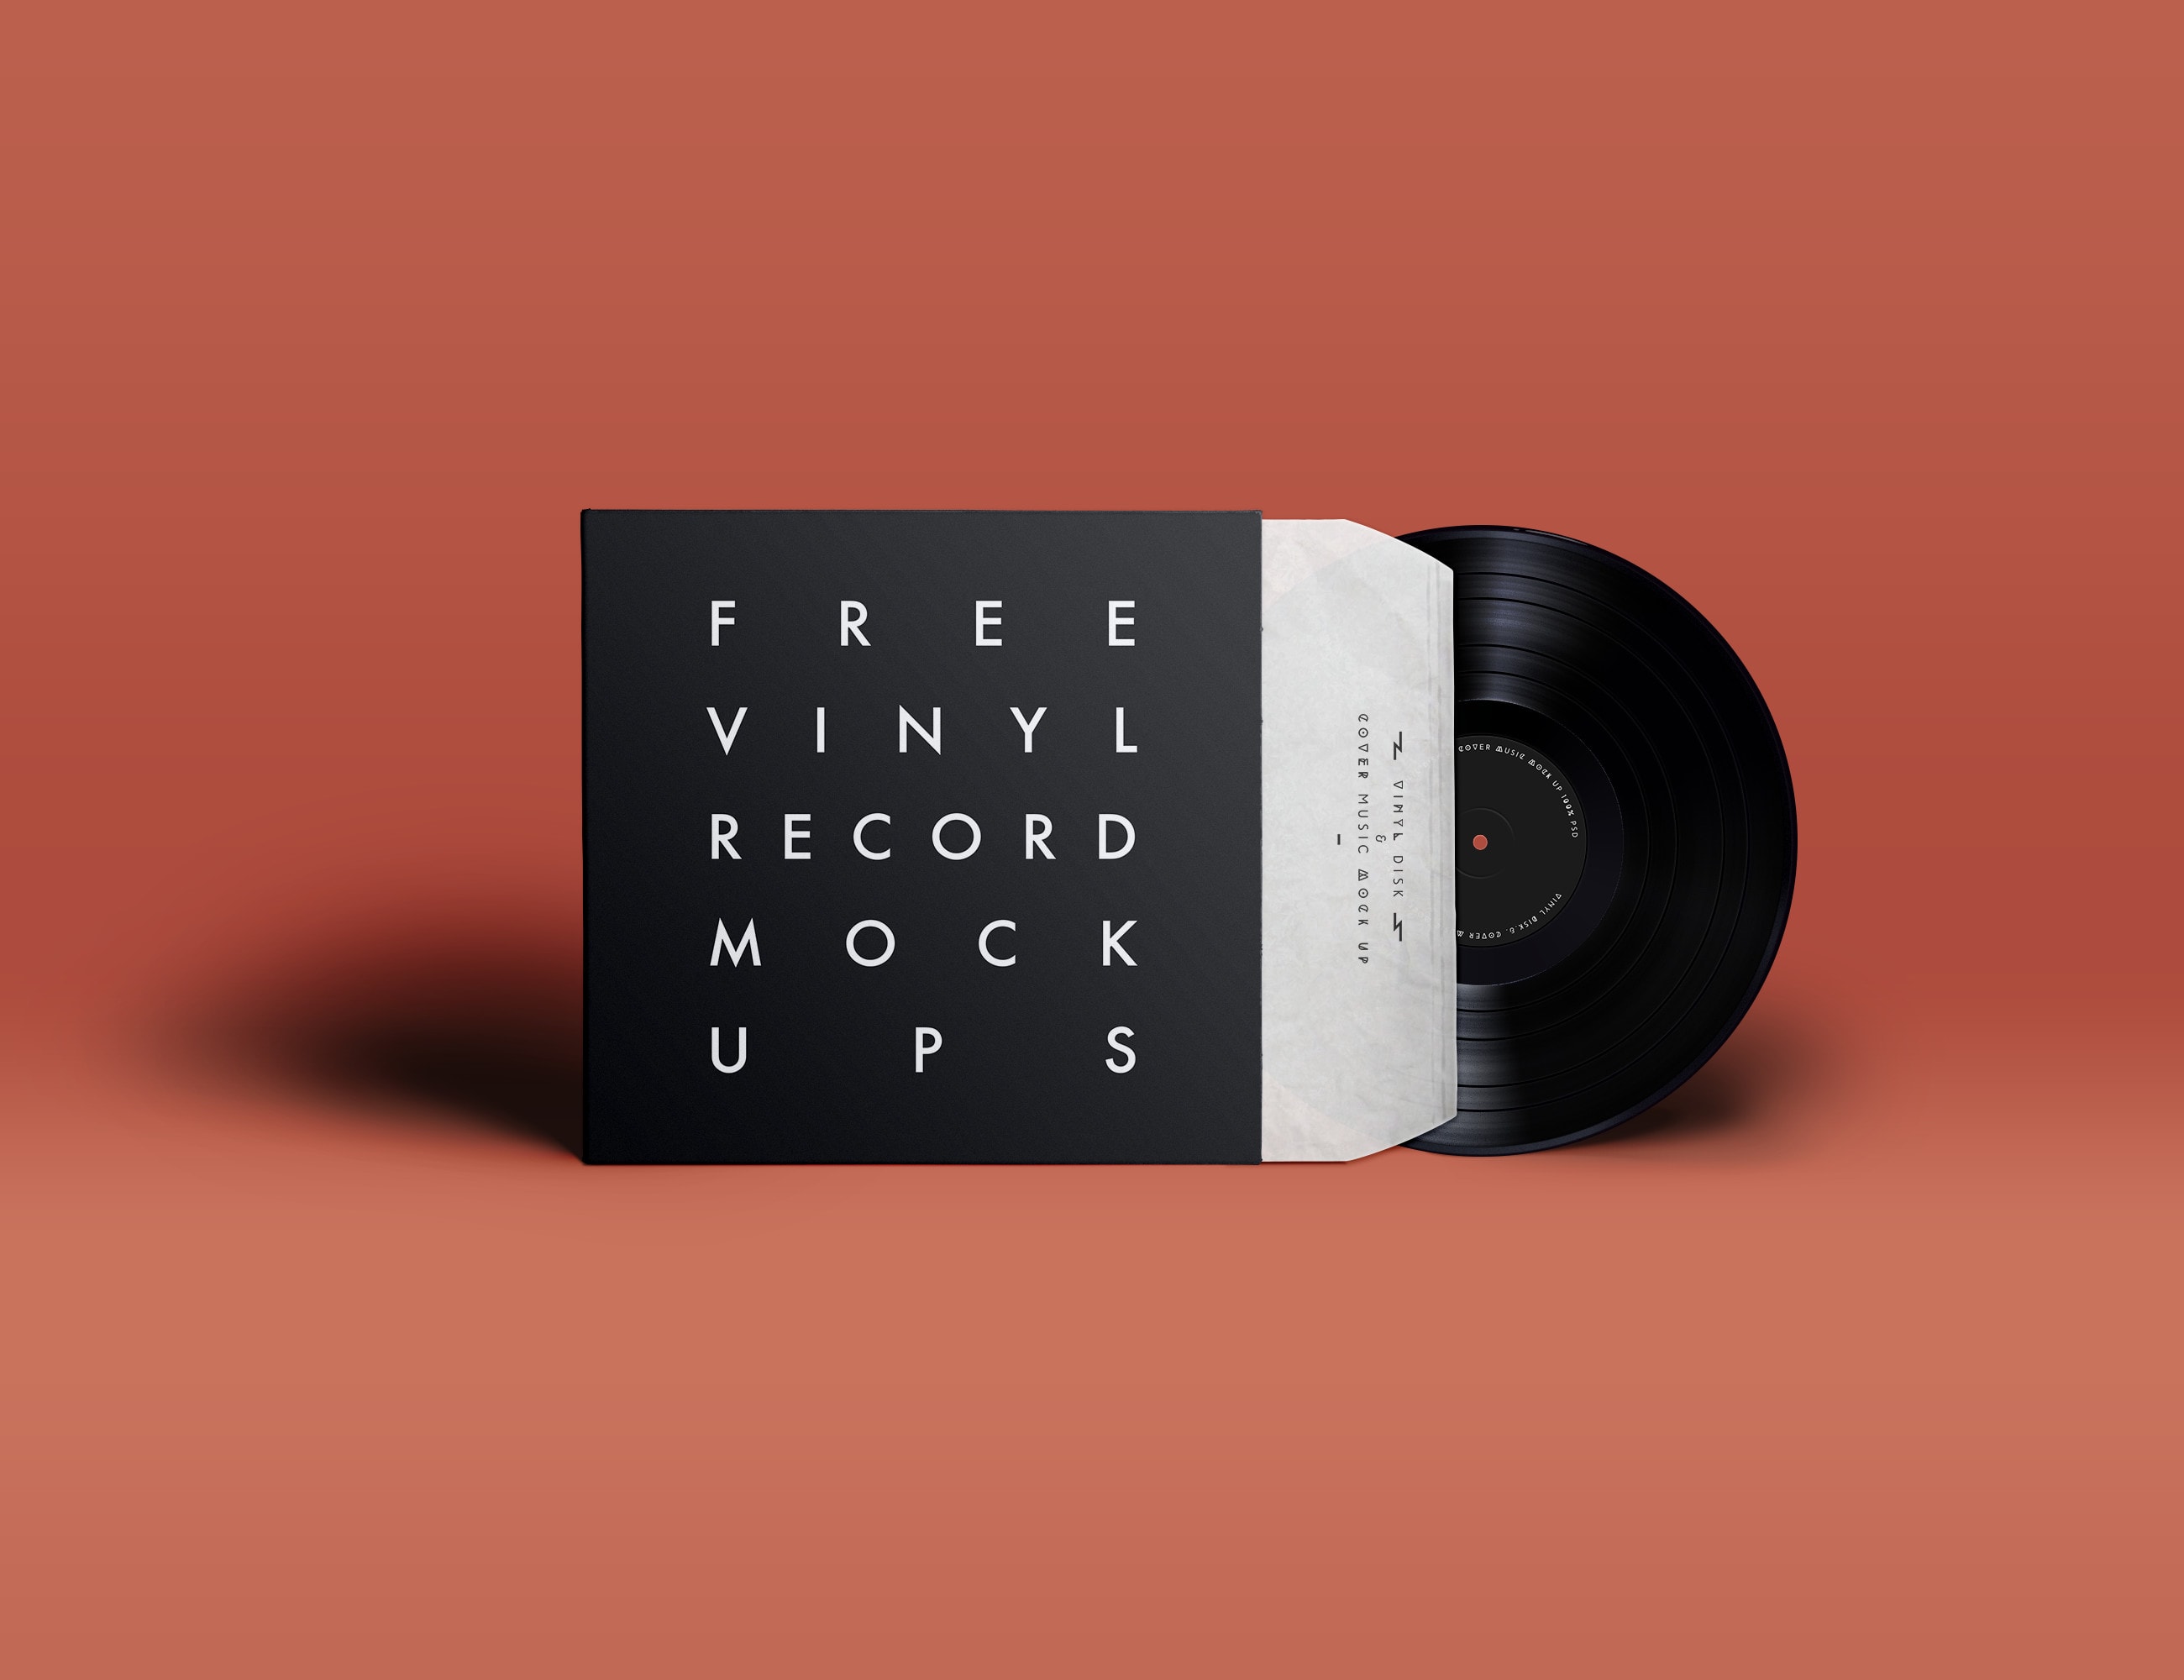 The 5+ Best FREE Vinyl Record PSD Mock-Ups | Hipsthetic